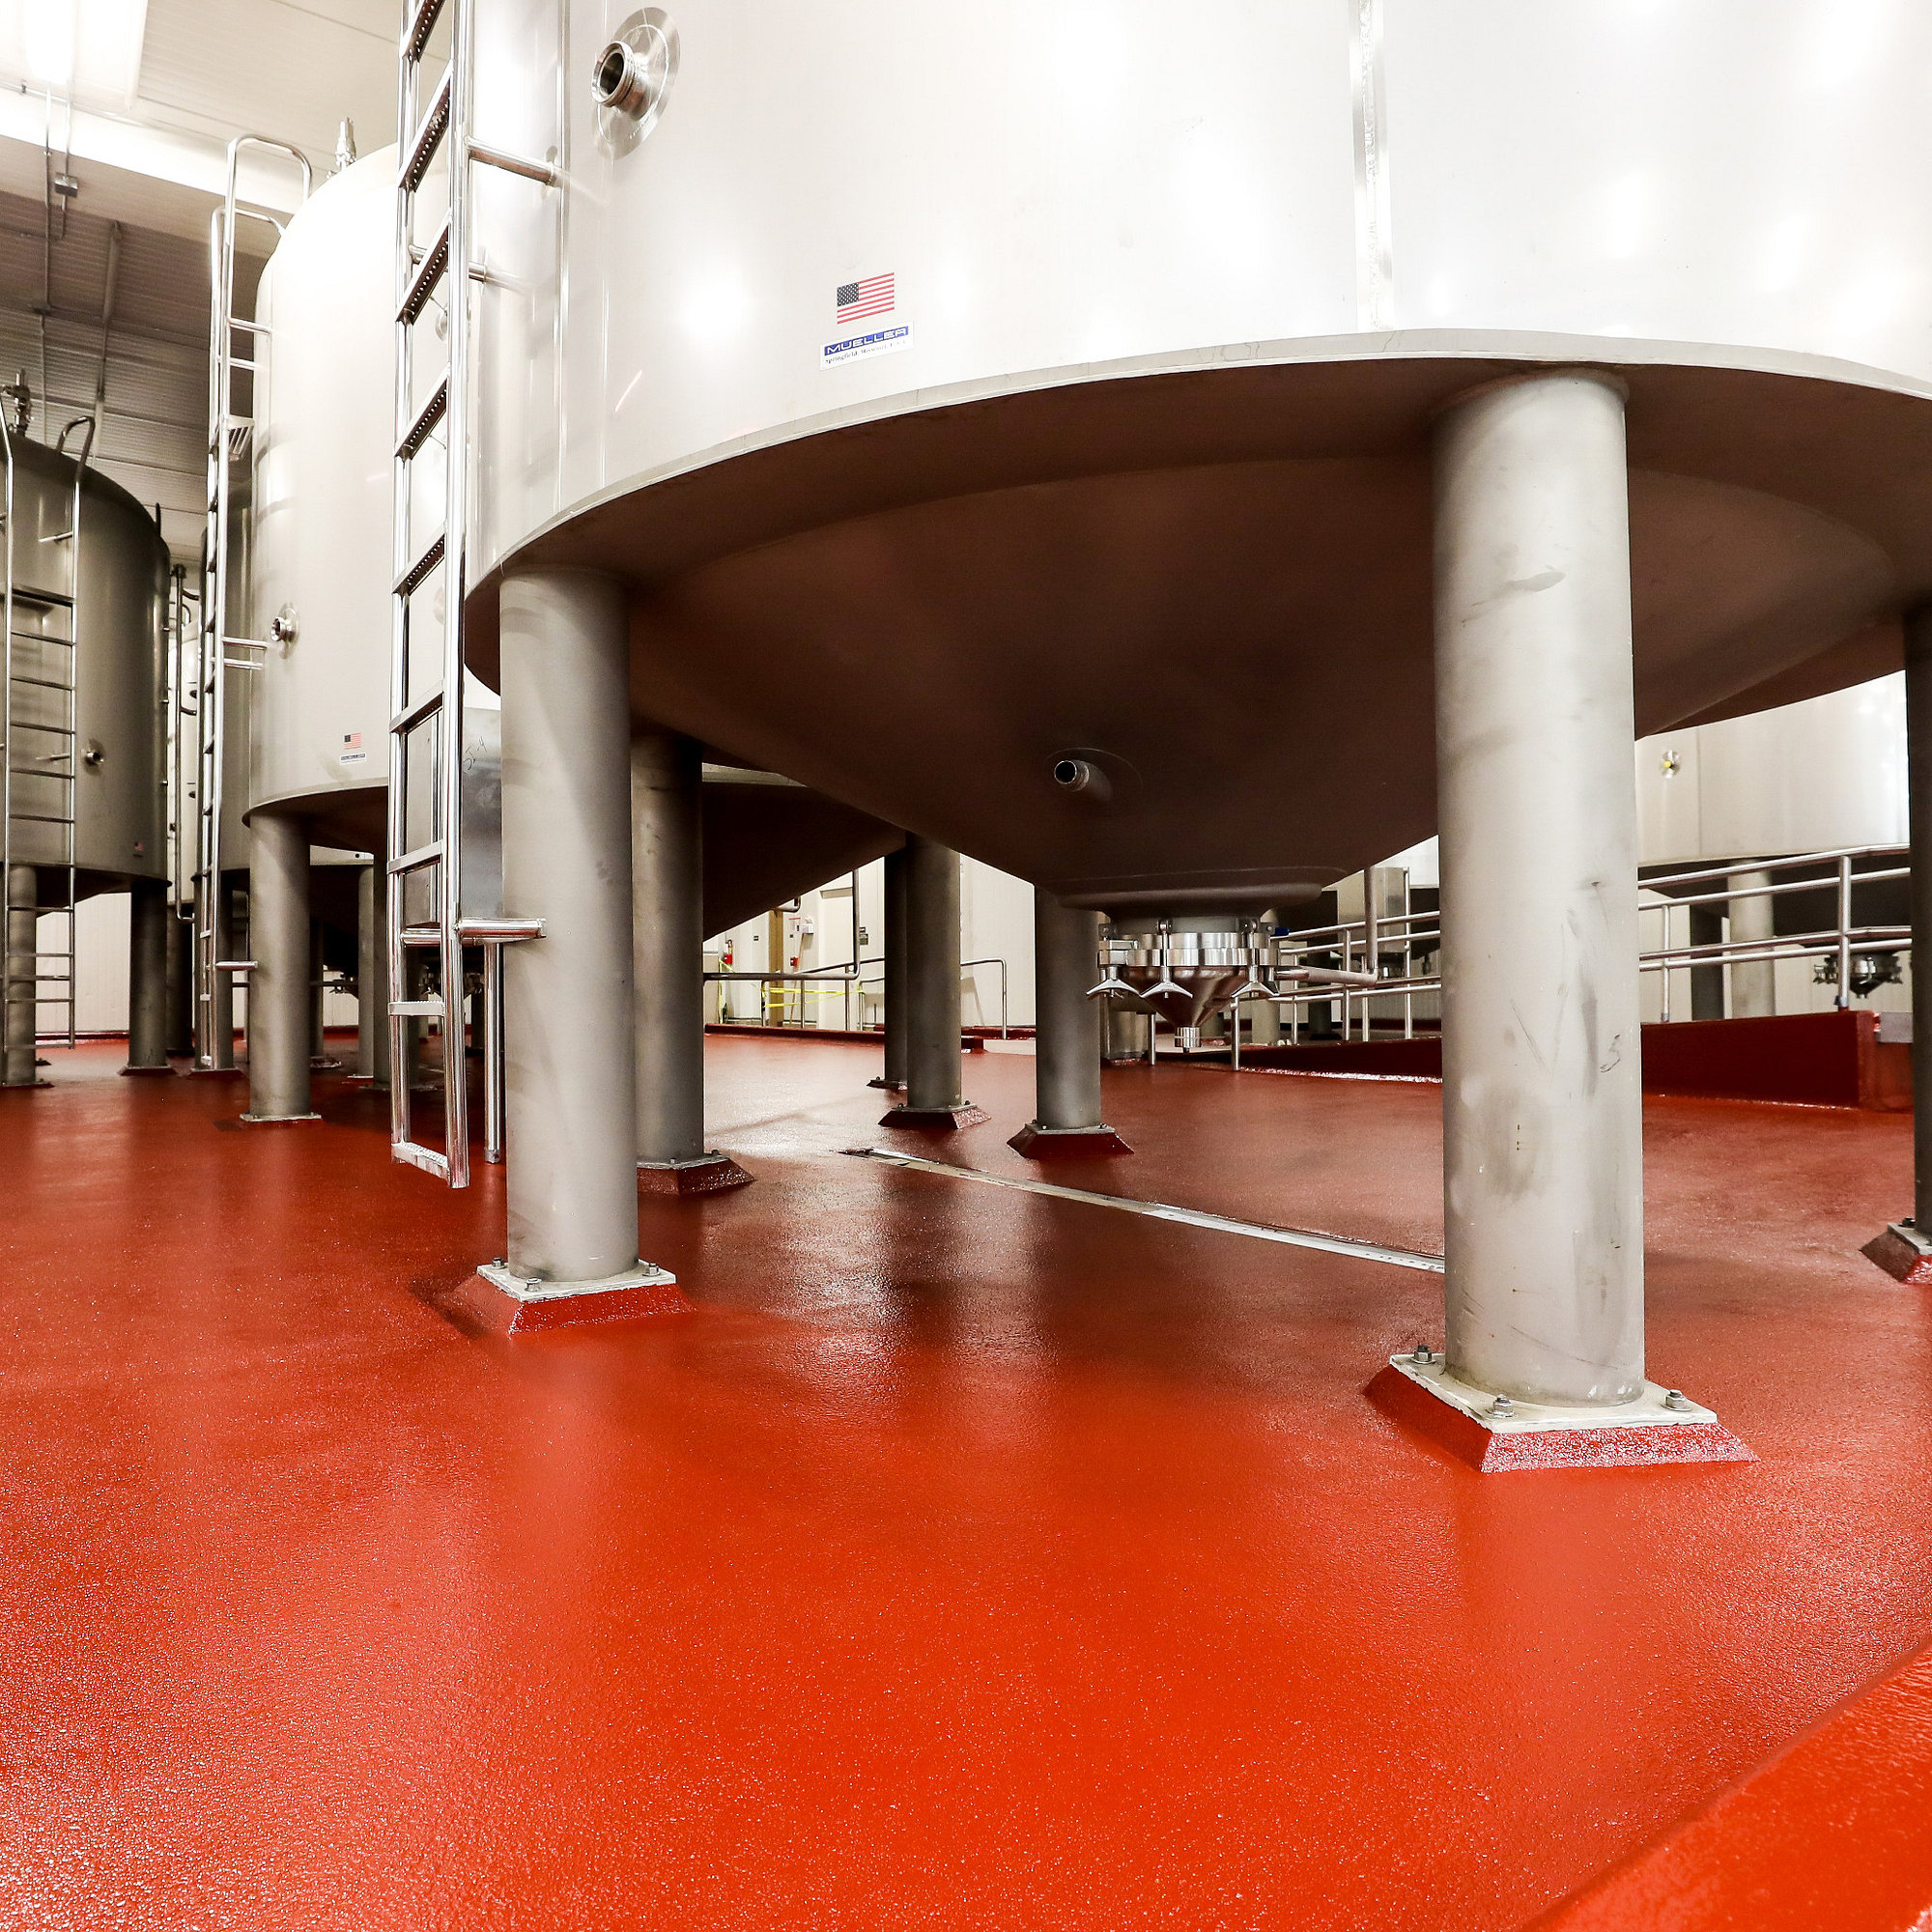 High performance flooring in a brewery facility